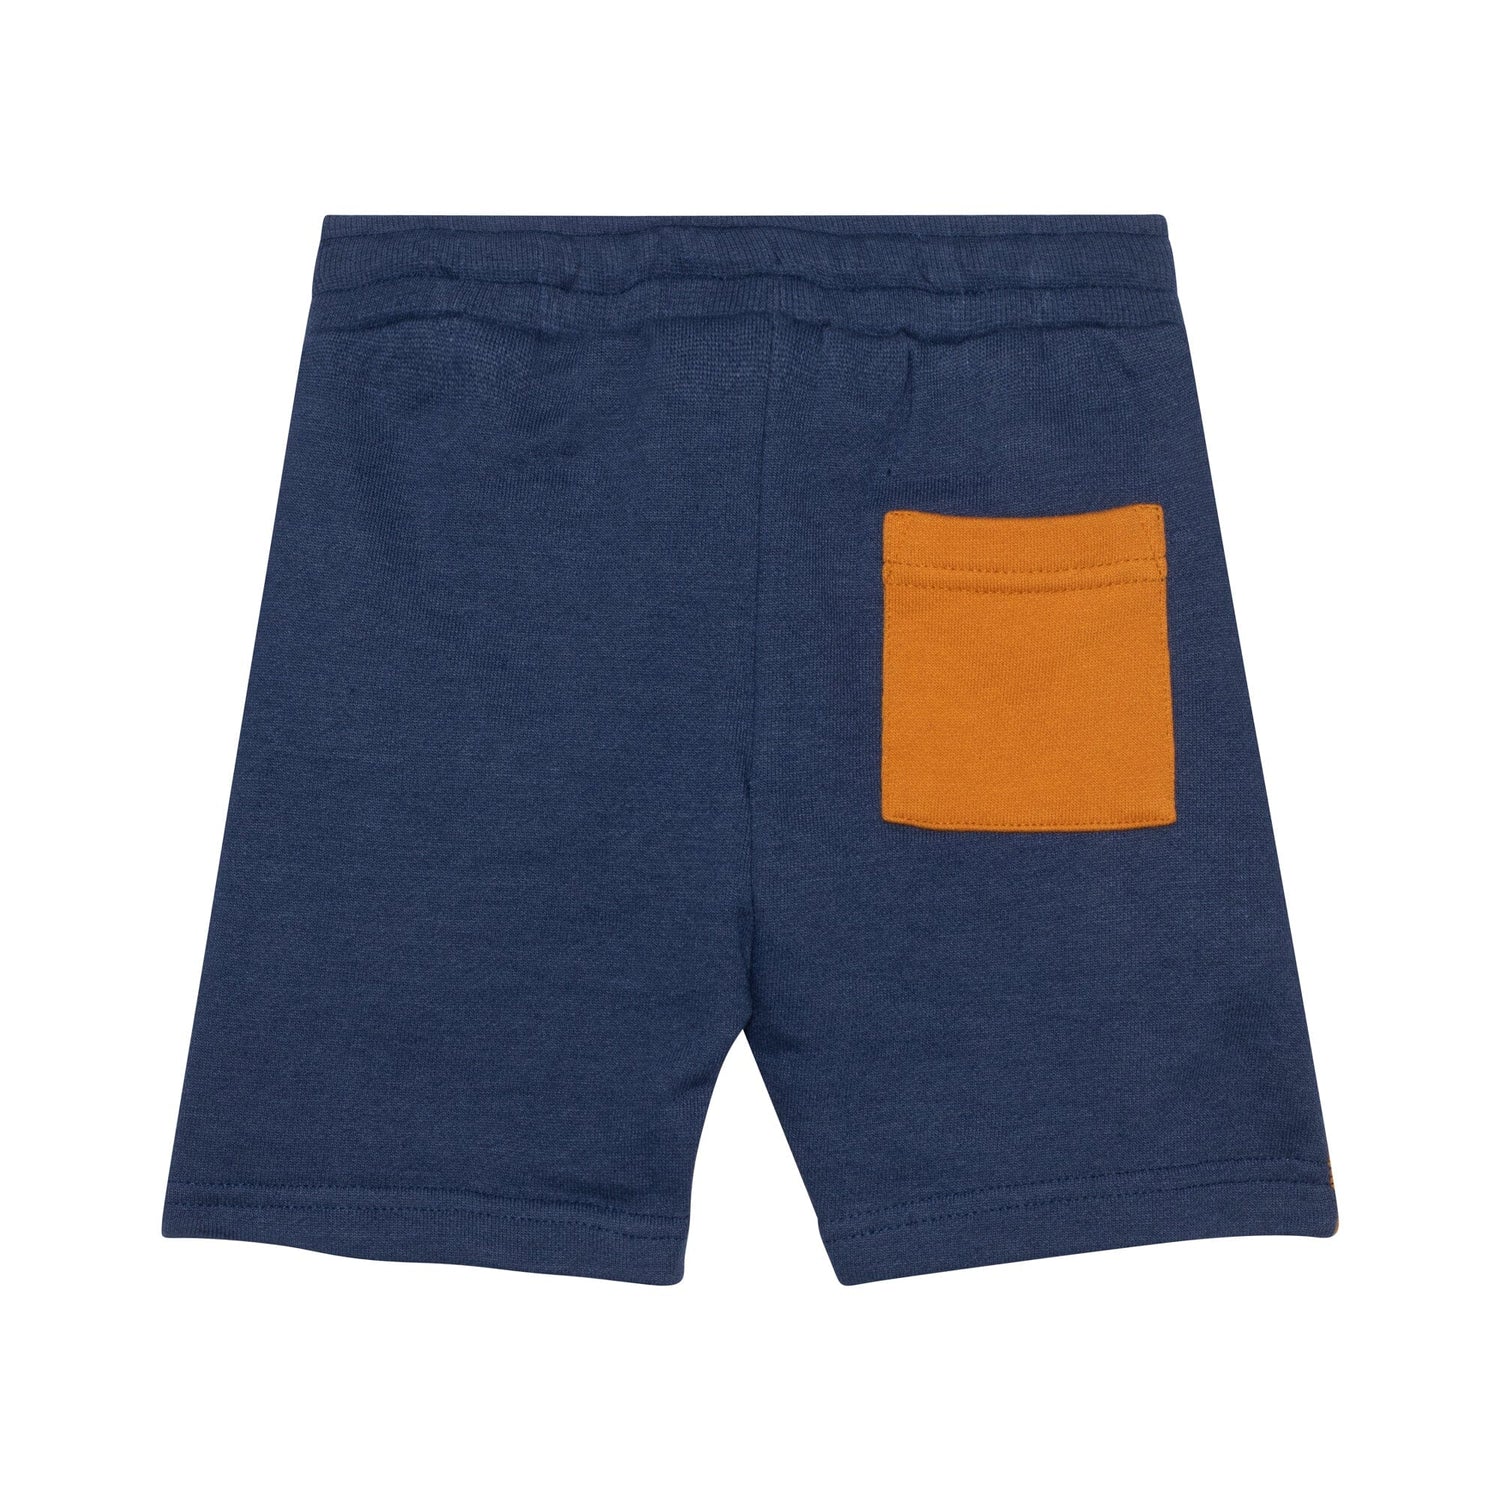 French Terry Short Navy Blue & Golden Yellow - E30S25_450